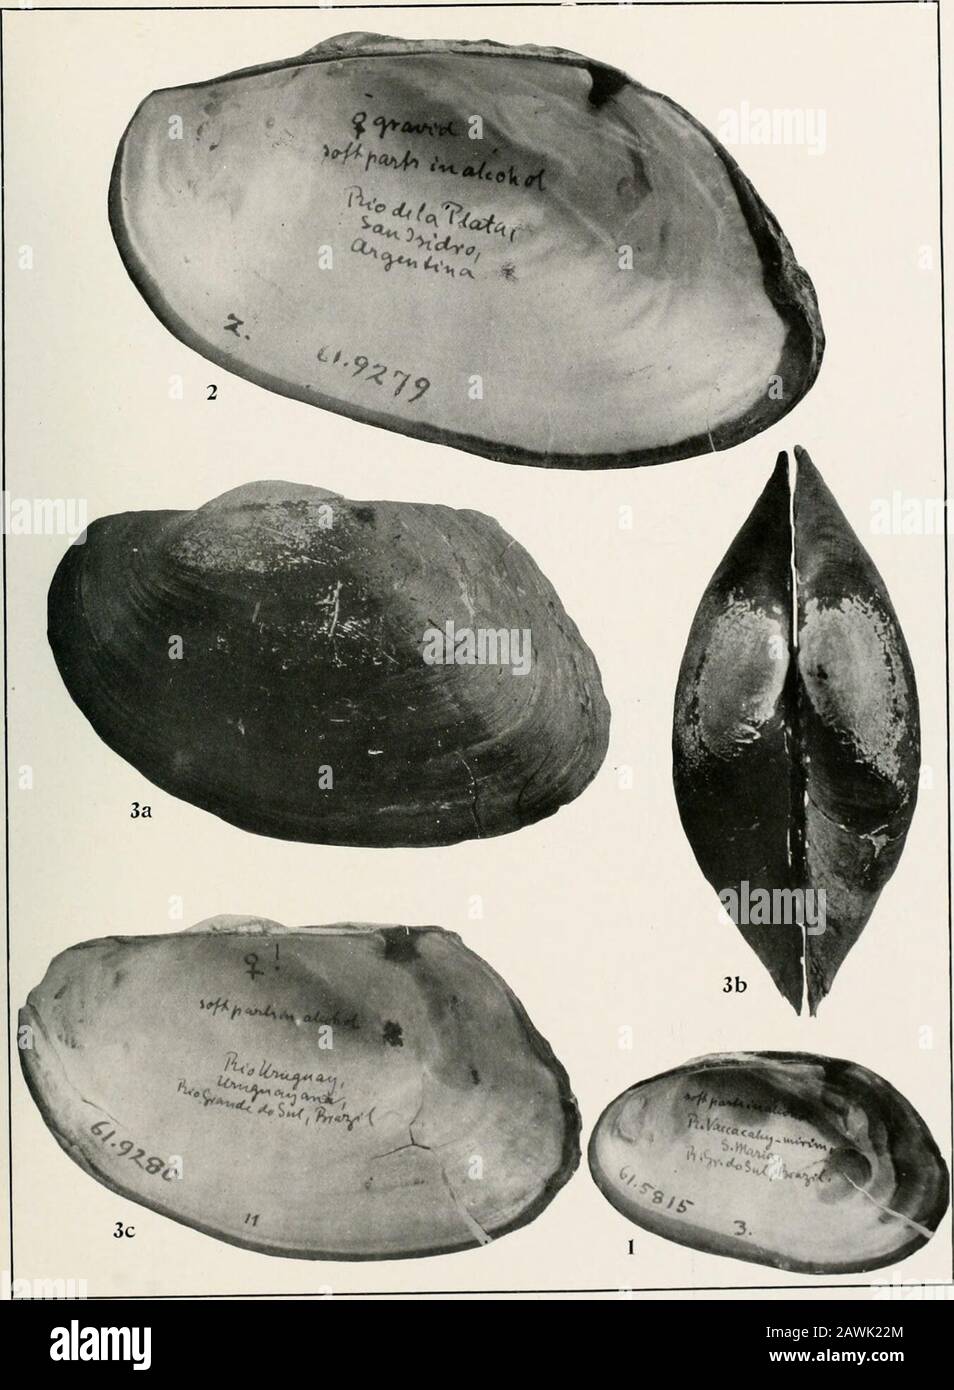 South American Naiades : a contribution to the knowledge of the freshwater mussels of South America . ring), and Anodontites forbesiana (Lea). All figures natural size. Fig. 1. Anodontites iheringi (Clessin), from Rio Vaccahy-mirim, Santa Maria,Rio Grande do Sul, Brazil. Carn. Mus. Cat. No. 61.5815 (See also Plate XLII, fig. 8,and Plate XLIII, fig. 1). Adult female (No. 3), inner view of right valve (Same specimenas that figured on Plate XLIII, fig. 1). Fig. 2. Anodontites riograndensis (Von Ihering), from Rio de la Plata, San Isidro,Argentina, Carn. Mus. Cat. No. 61.9279 (See also Plate XLIII Stock Photo